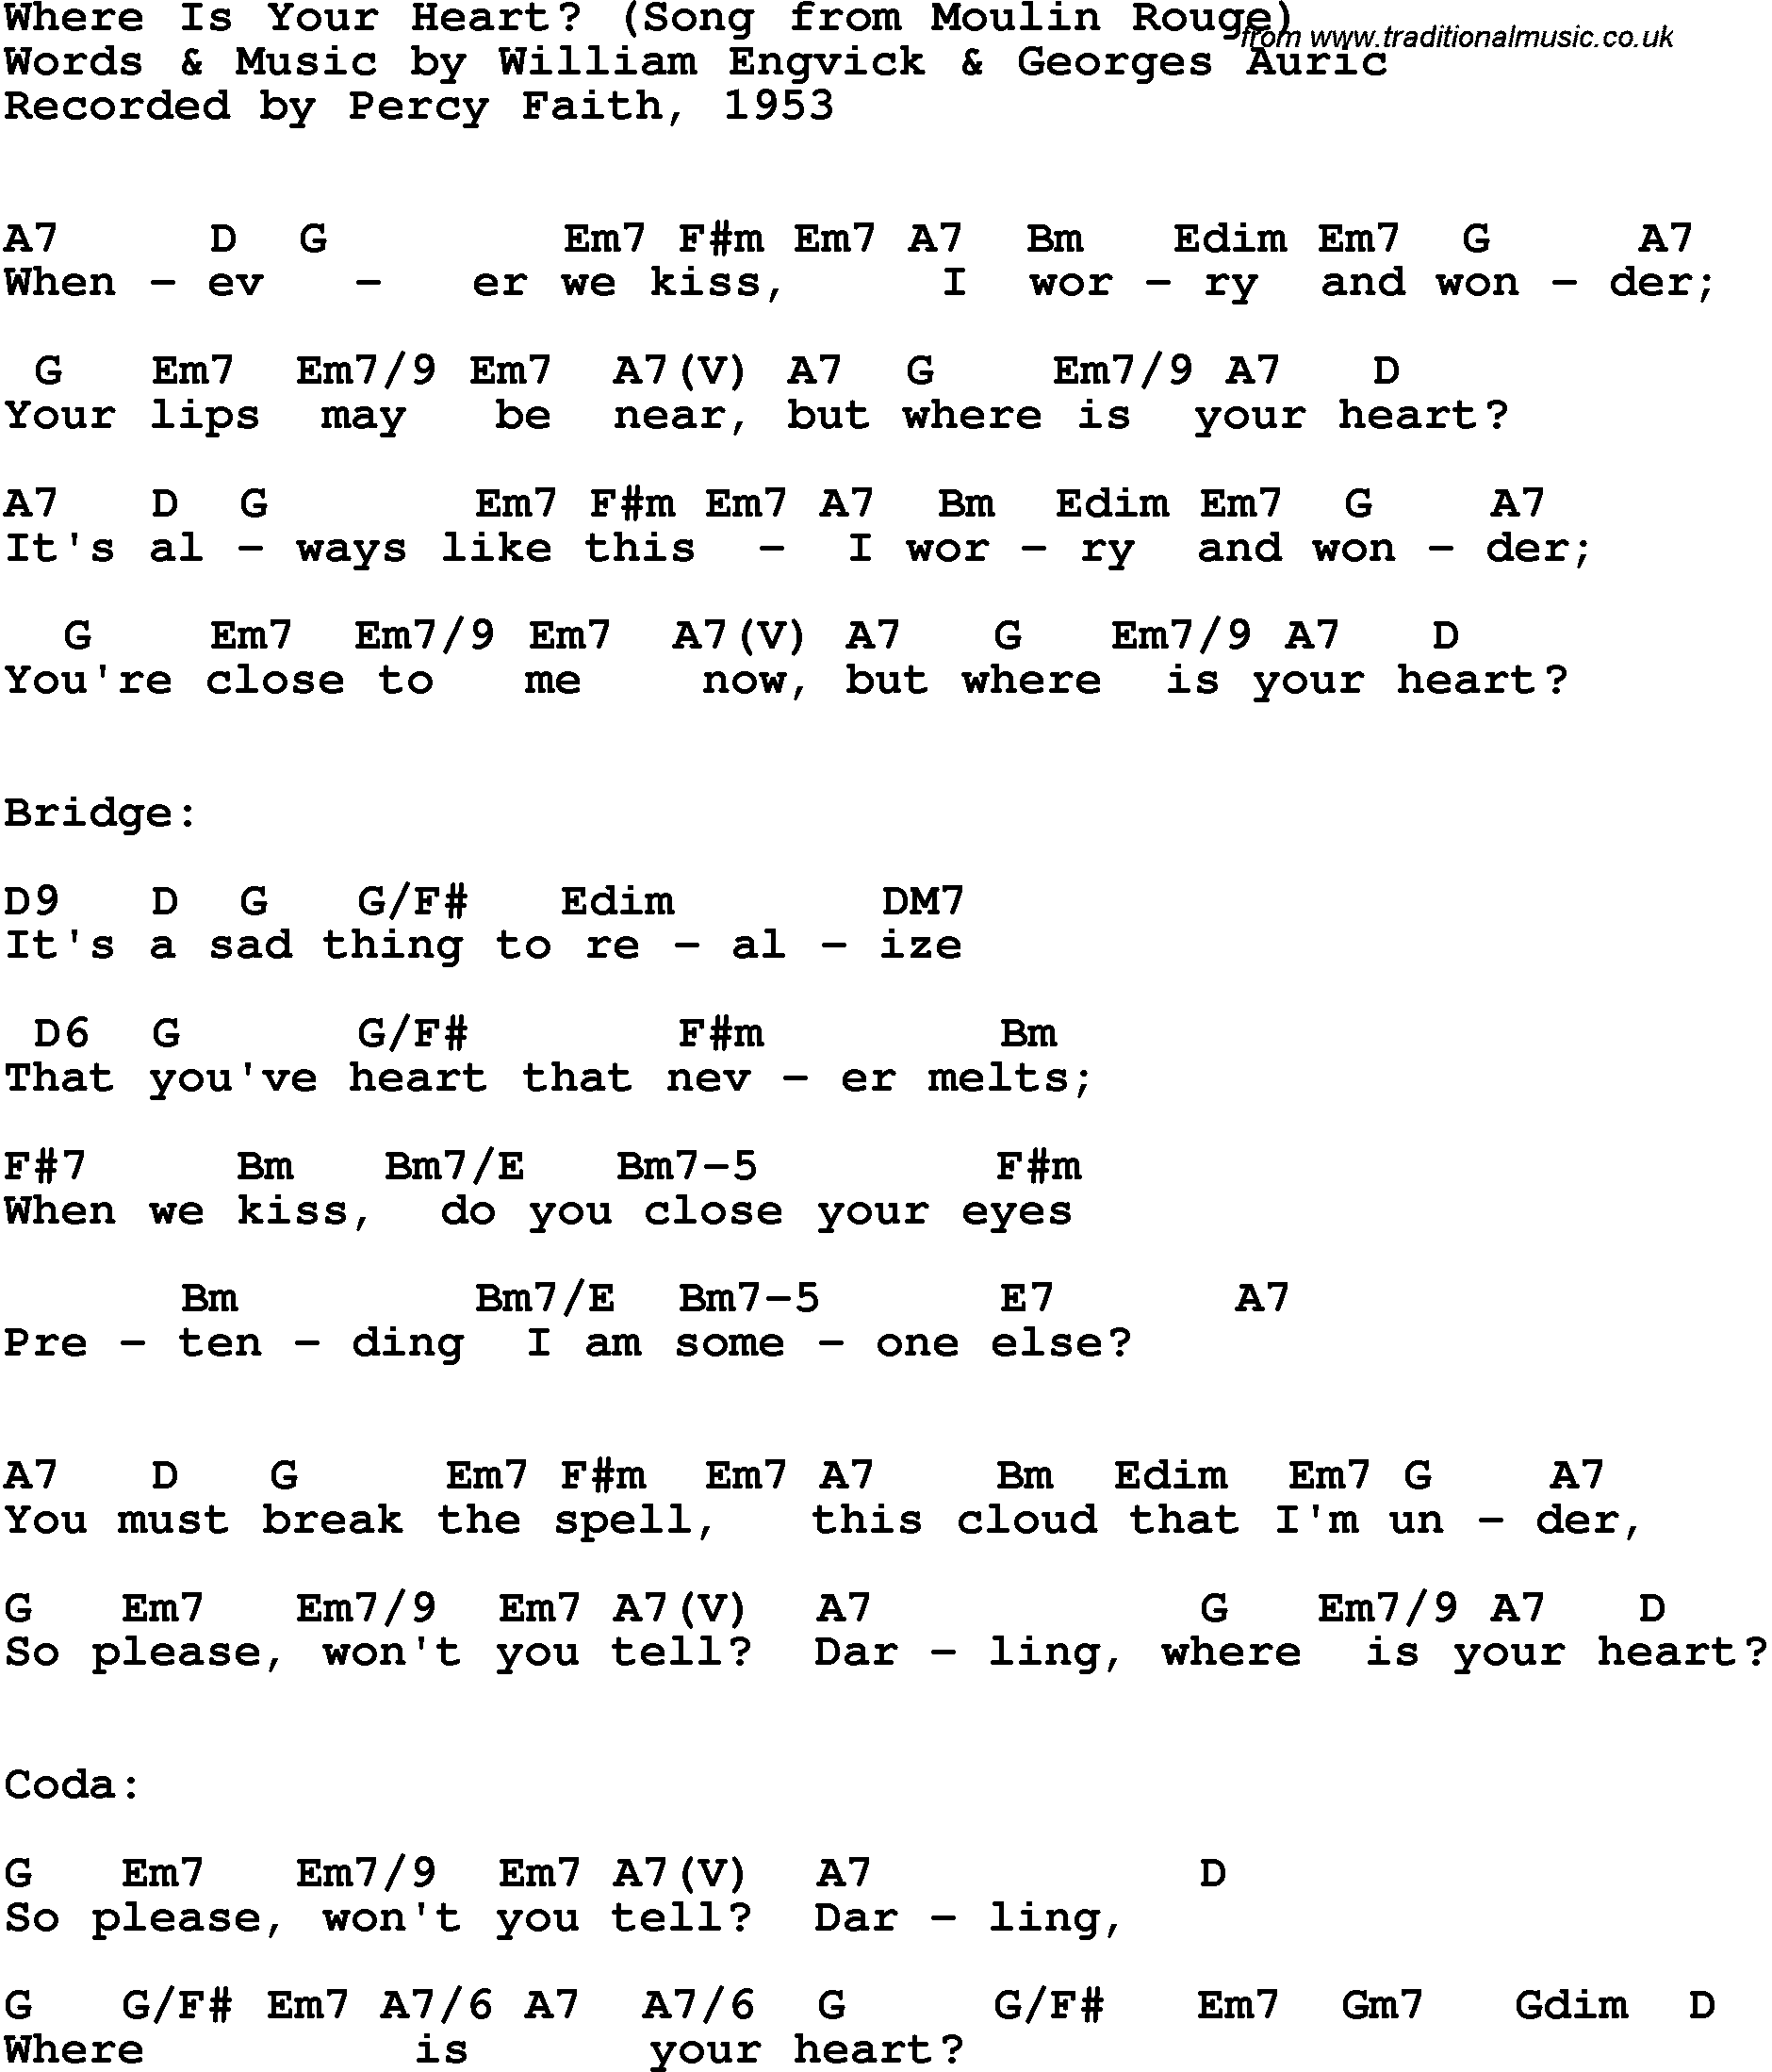 Song Lyrics with guitar chords for Where Is Your Heart - Percy Faith, 1953